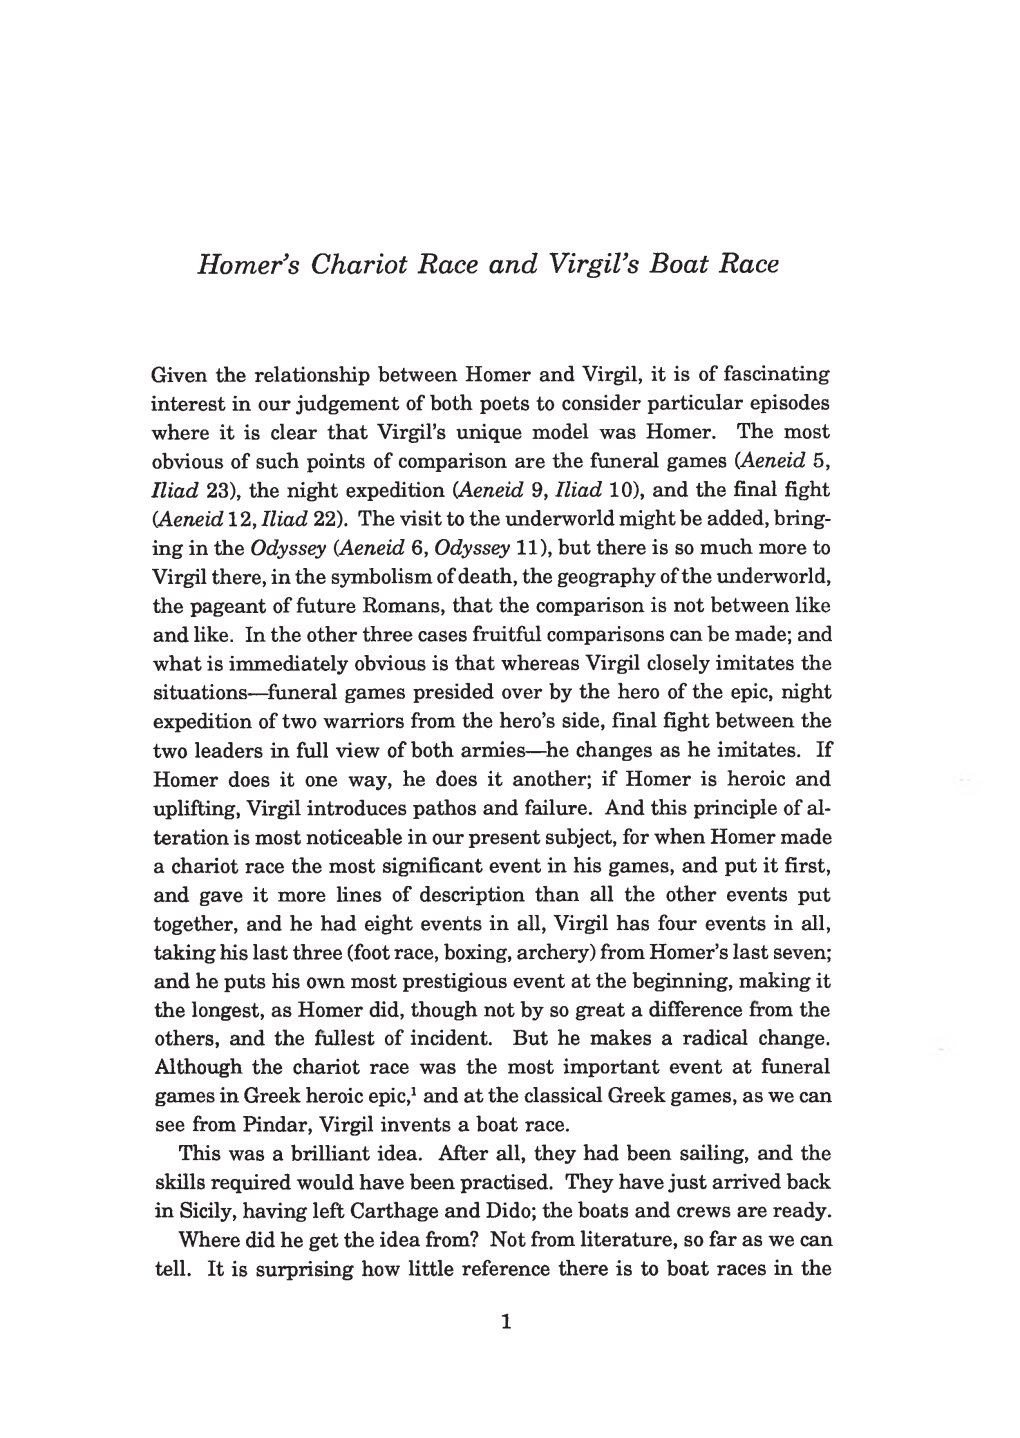 Homer's Chariot Race and Virgil's Boat Race